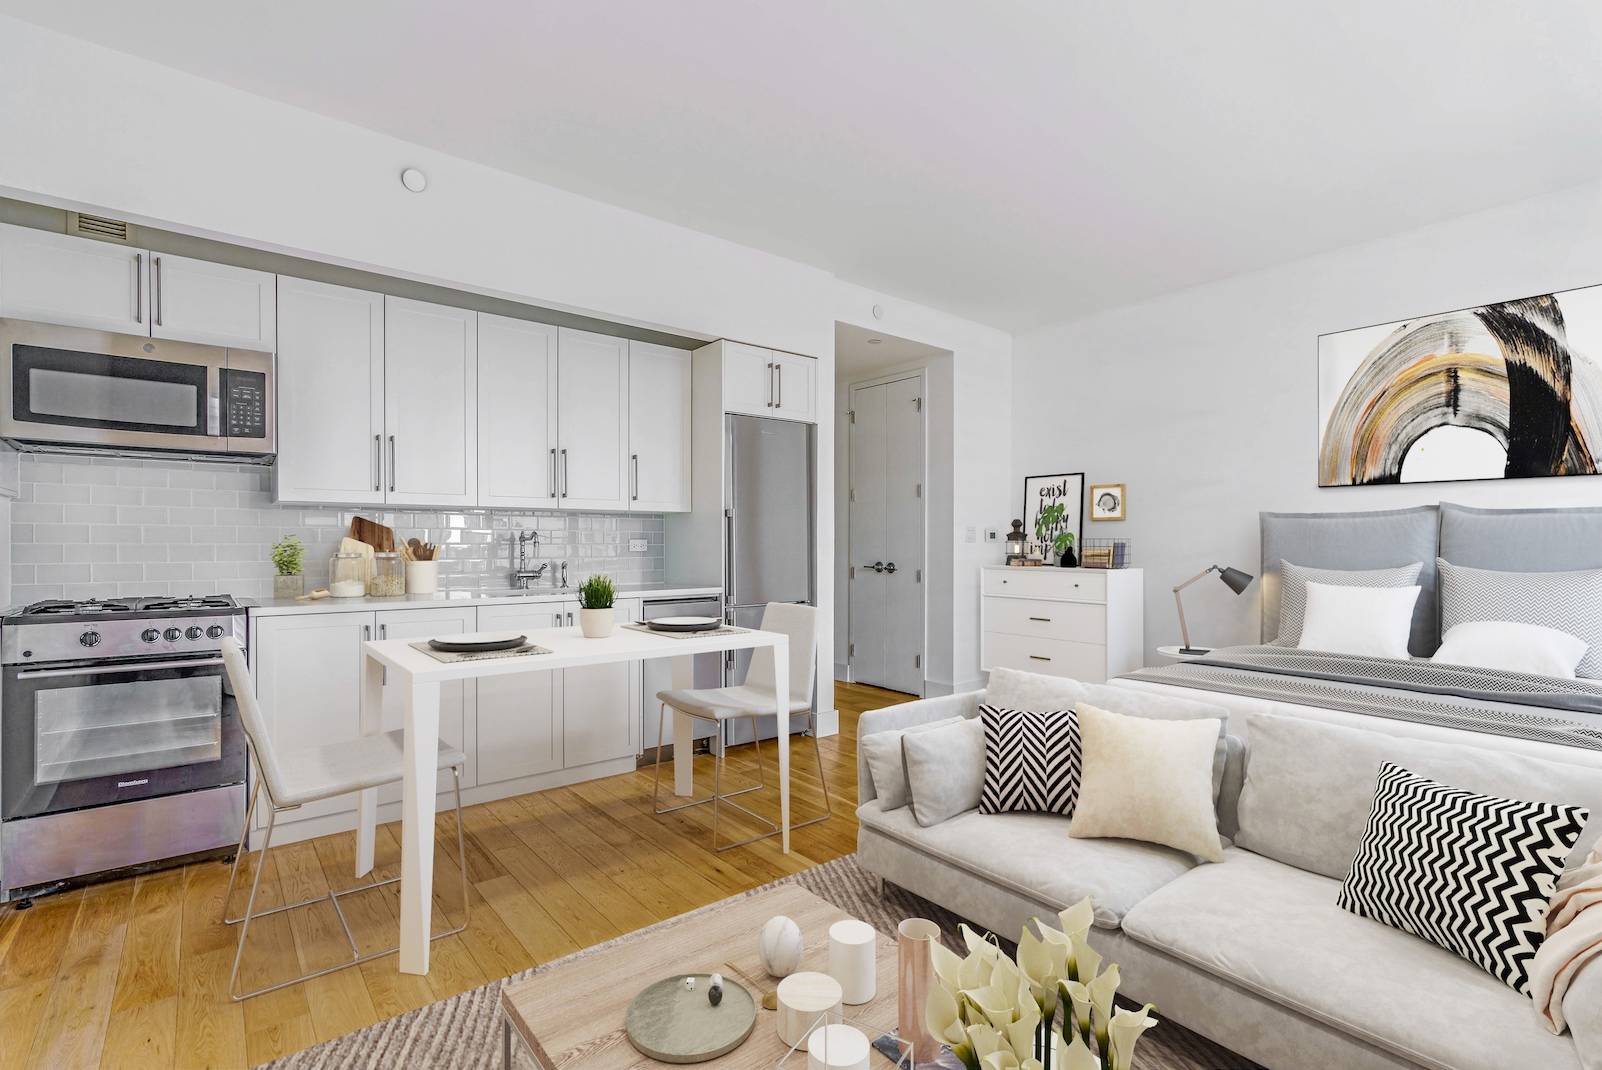 SUPERB STUDIO HOME at the ELEGANT HARRISON optimally situated in COURT SQUAREOWN a stylish STUDIO at the urbanistic HARRISON Condominium built just 3 years ago a design that blends industrial ...